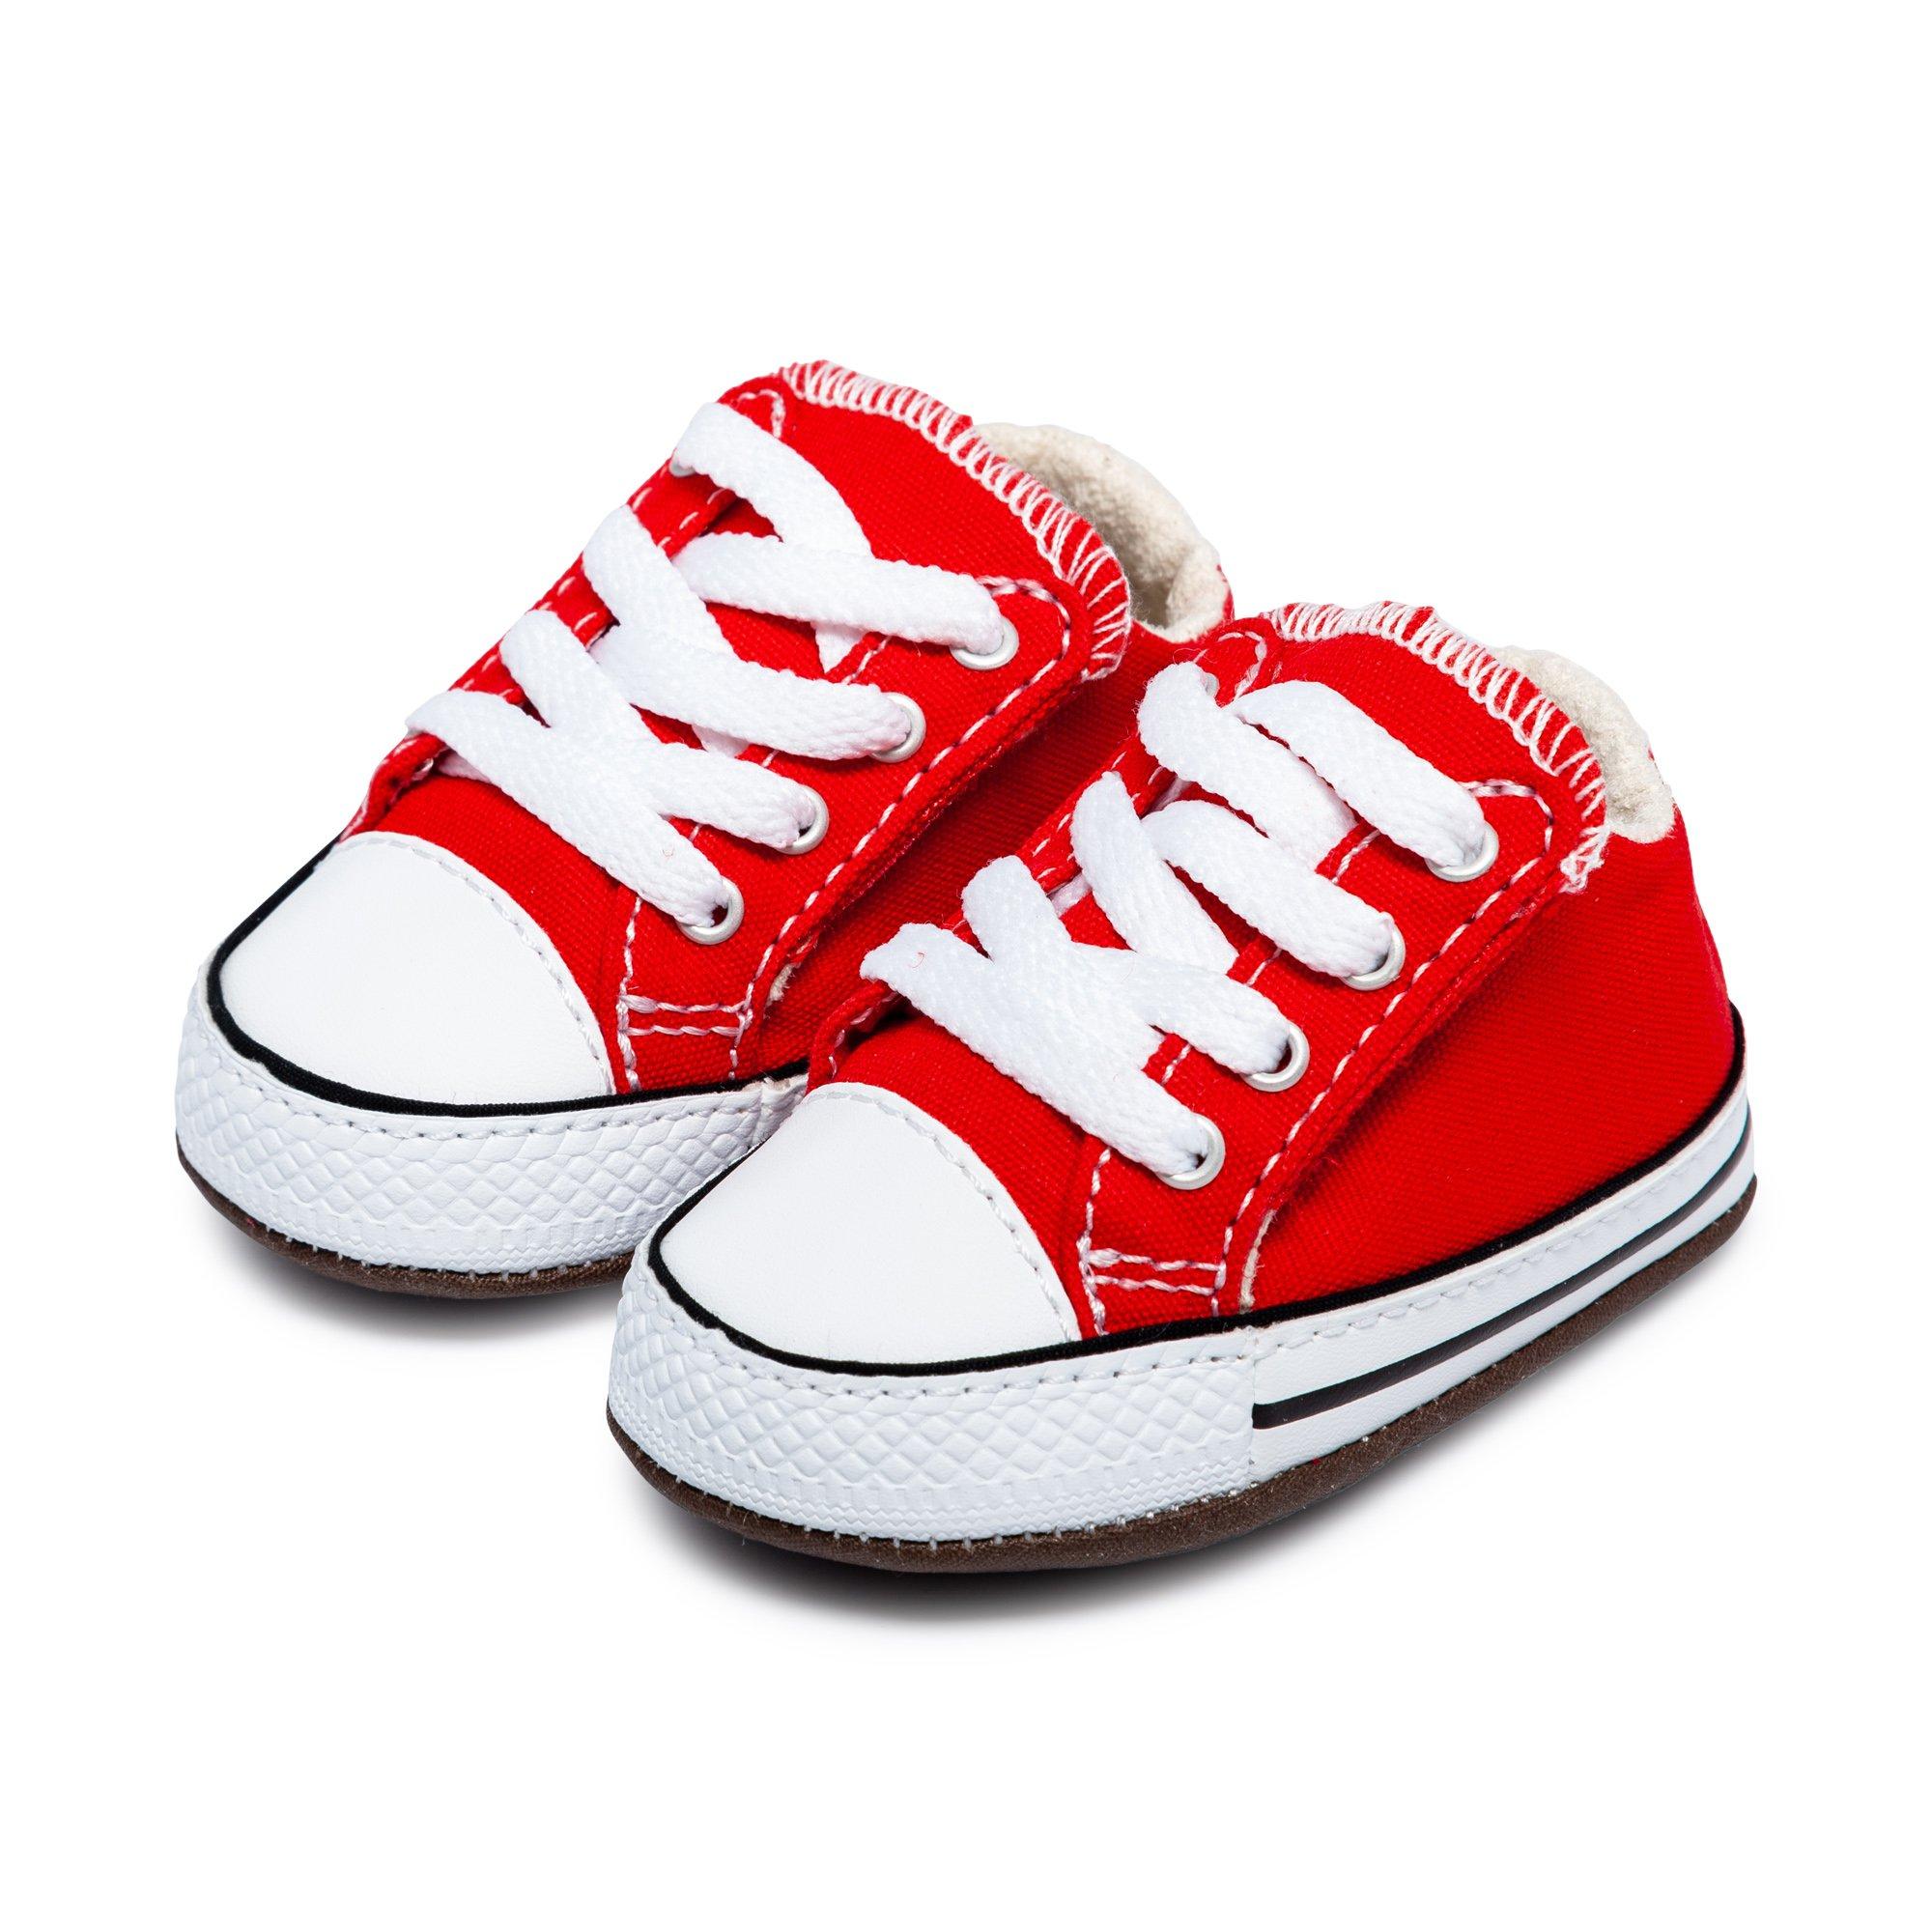 CONVERSE CHUCK TAYLOR ALL STAR CRIBSTER Sneakers, Low Top 